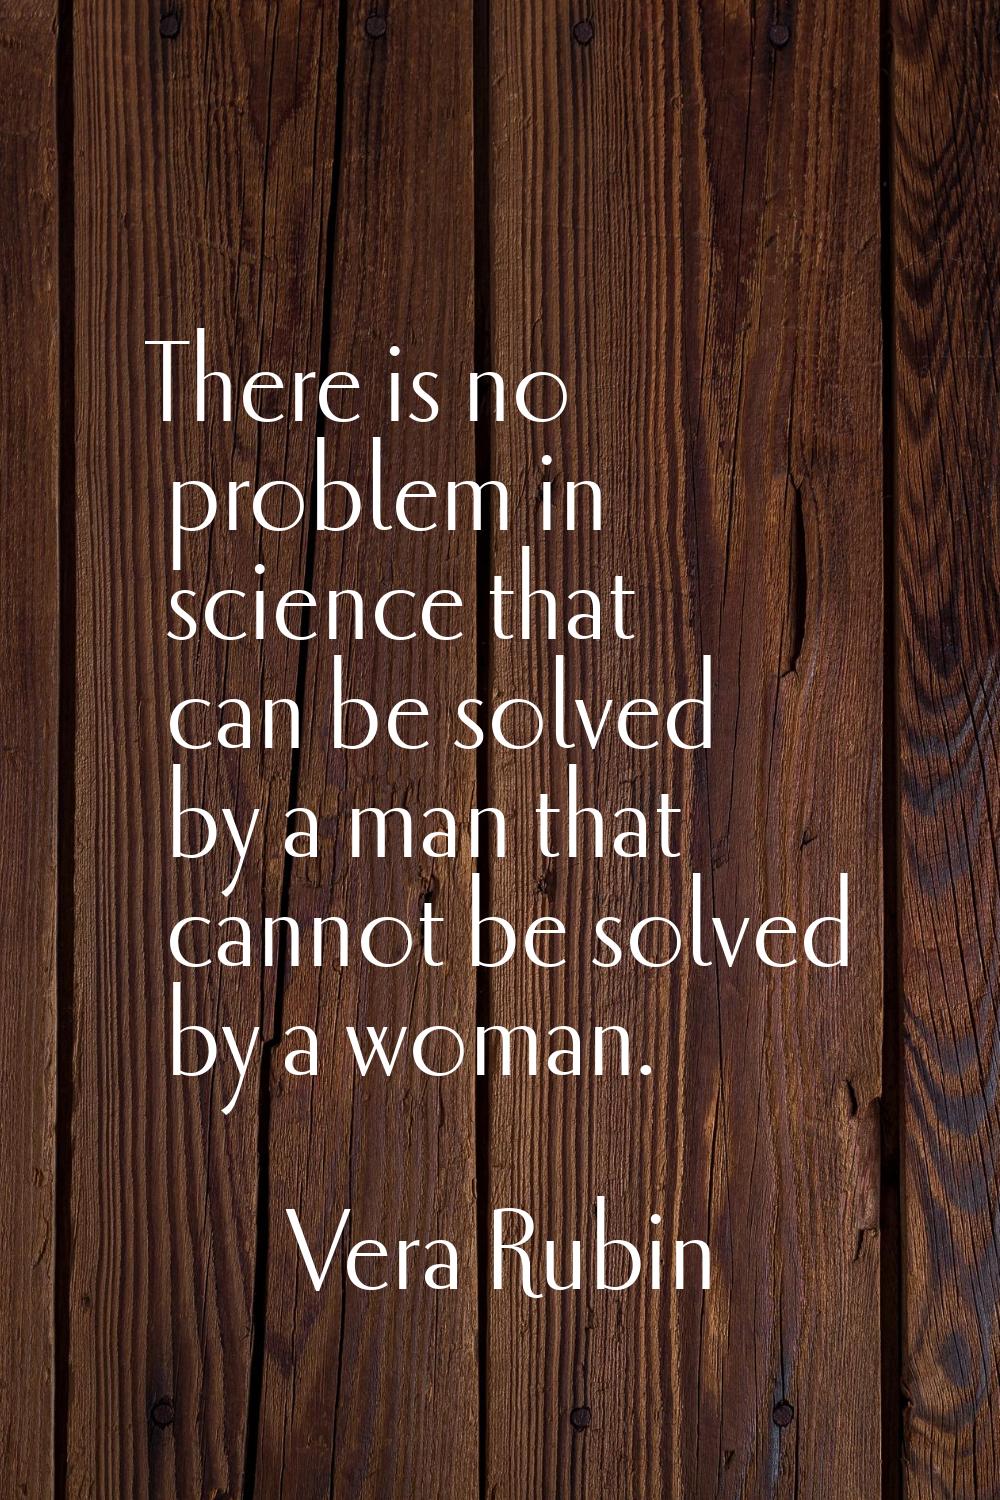 There is no problem in science that can be solved by a man that cannot be solved by a woman.